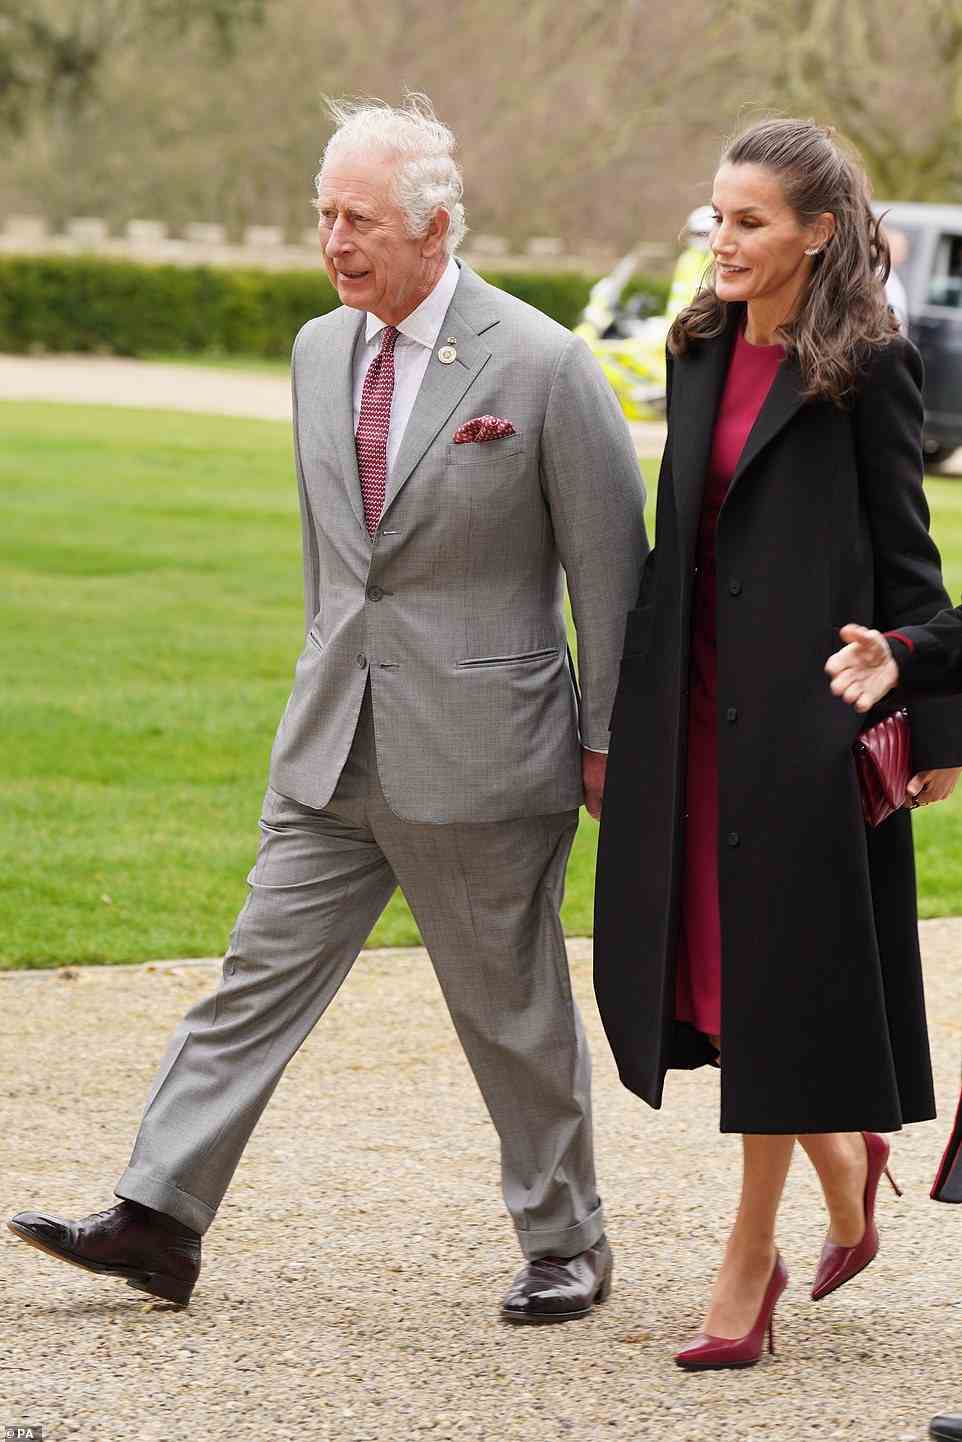 Prince Charles and Queen Letizia, who days ago attended Prince Philip's memorial service in London, appeared to be in high spirits during the visit